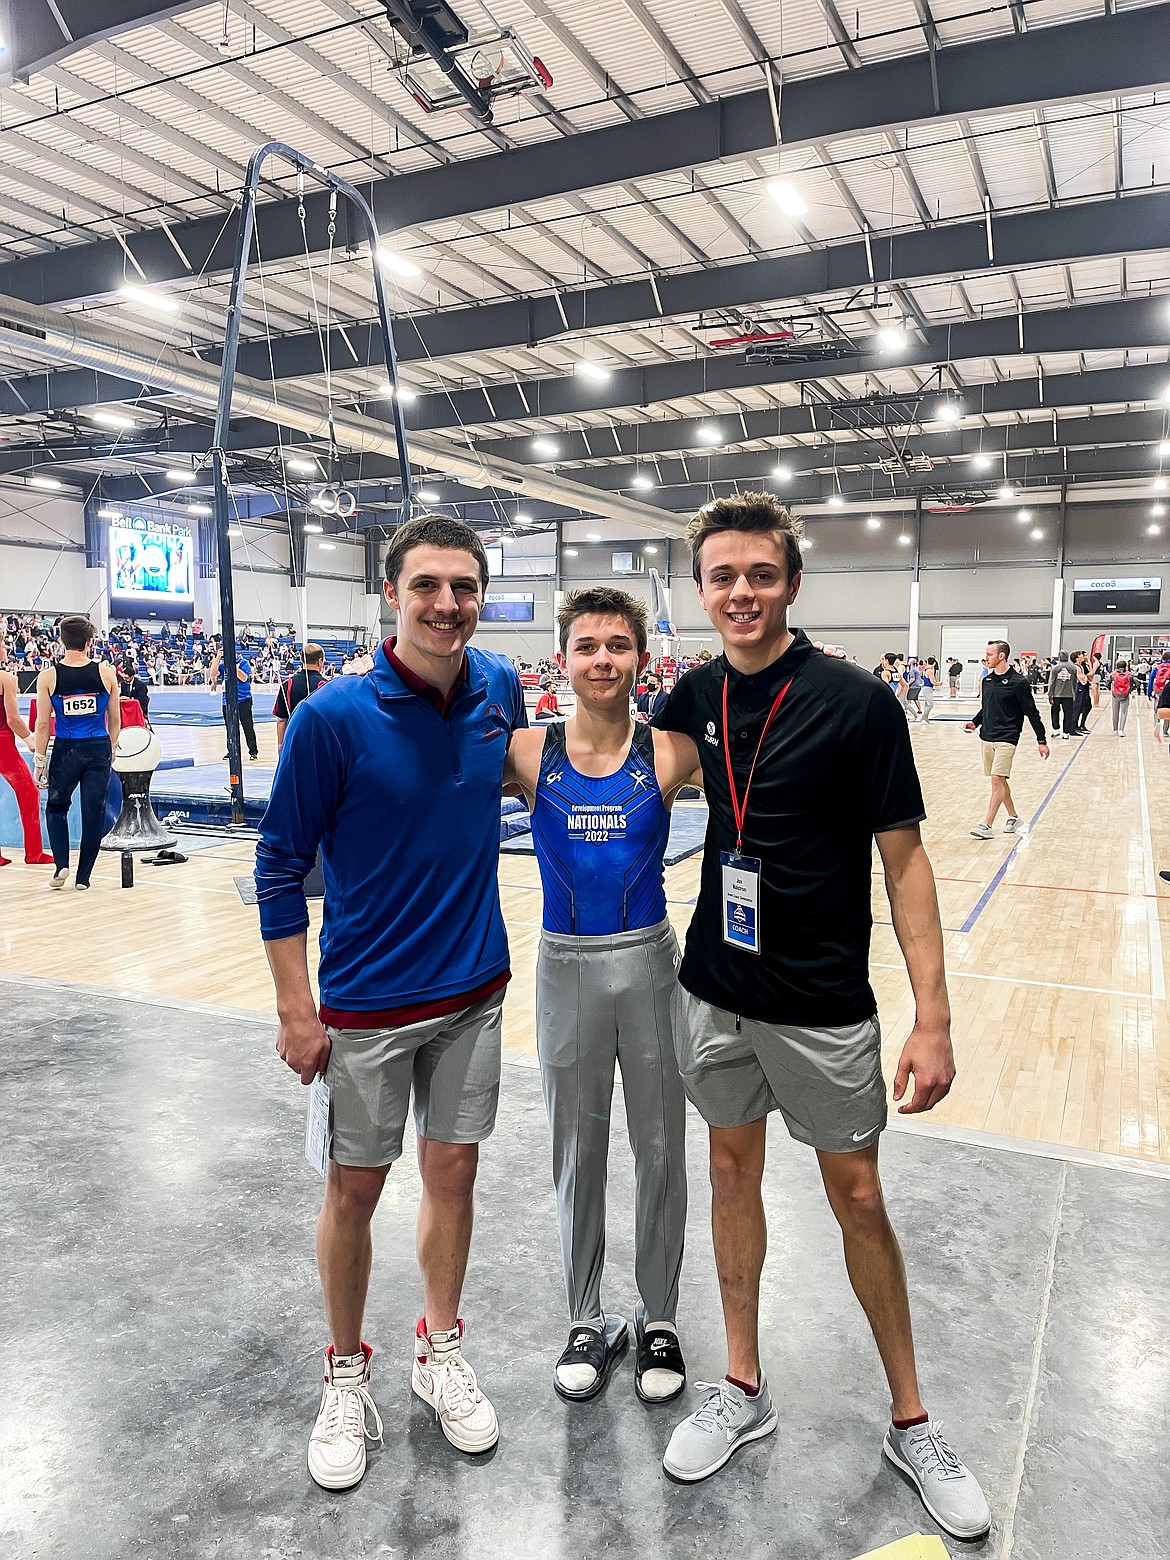 Courtesy photo

Avant Coeur Gymnastics Level 10 Caden Severtson competed at the national championships at Bell Bank Park in Mesa, Ariz., this past weekend. Caden tied for 8th on Pommel with an 11.550, and had a high of 12 on Vault. From left are coach Matt Auerbach, Caden Severtson and coach Jon Winkelbaur.